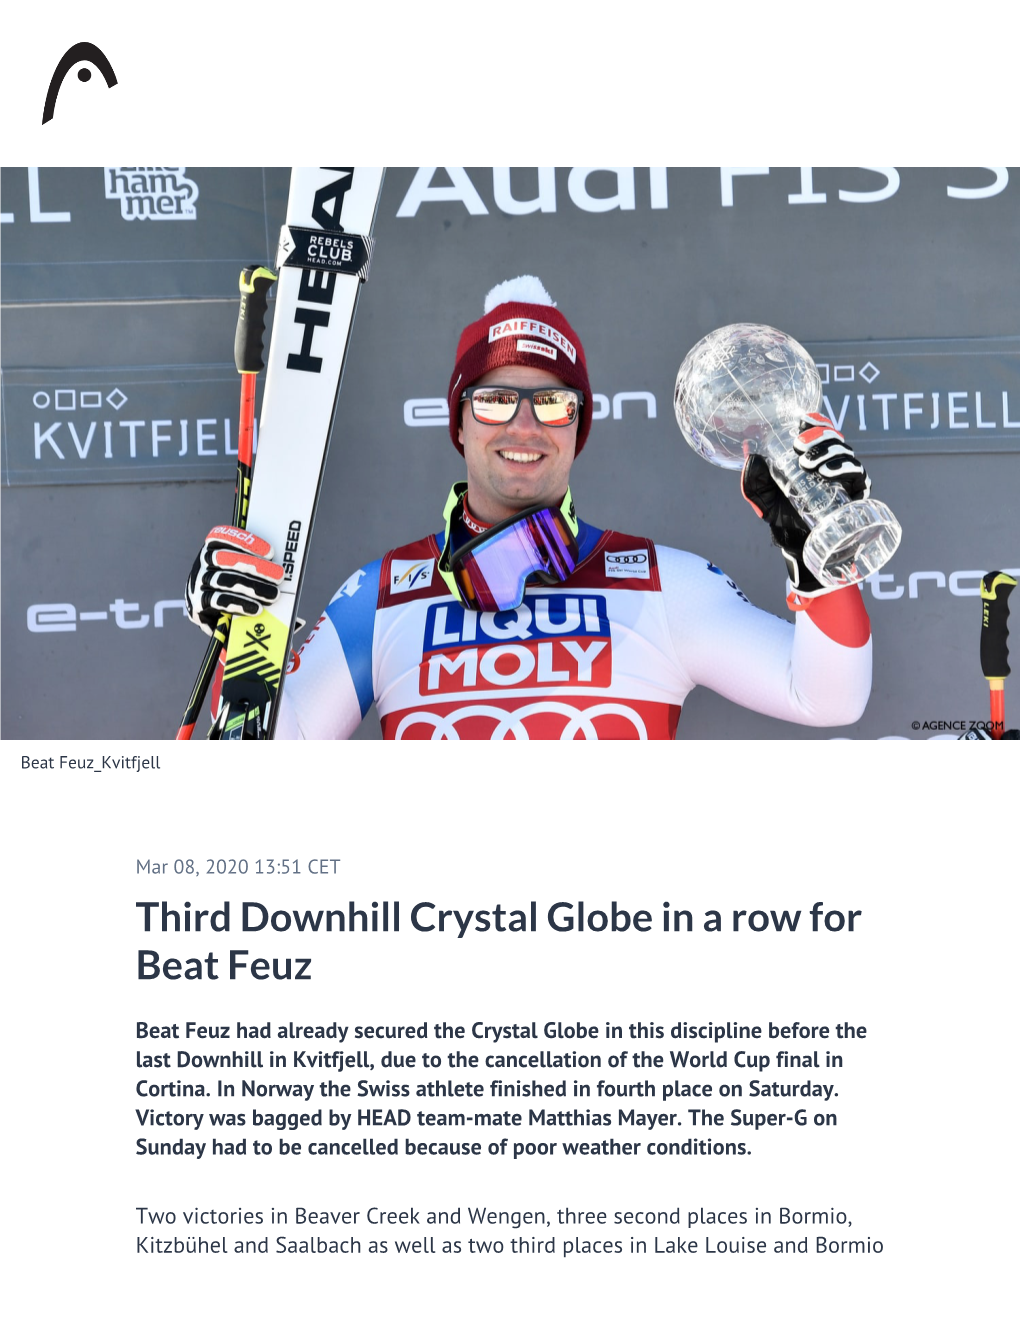 Third Downhill Crystal Globe in a Row for Beat Feuz